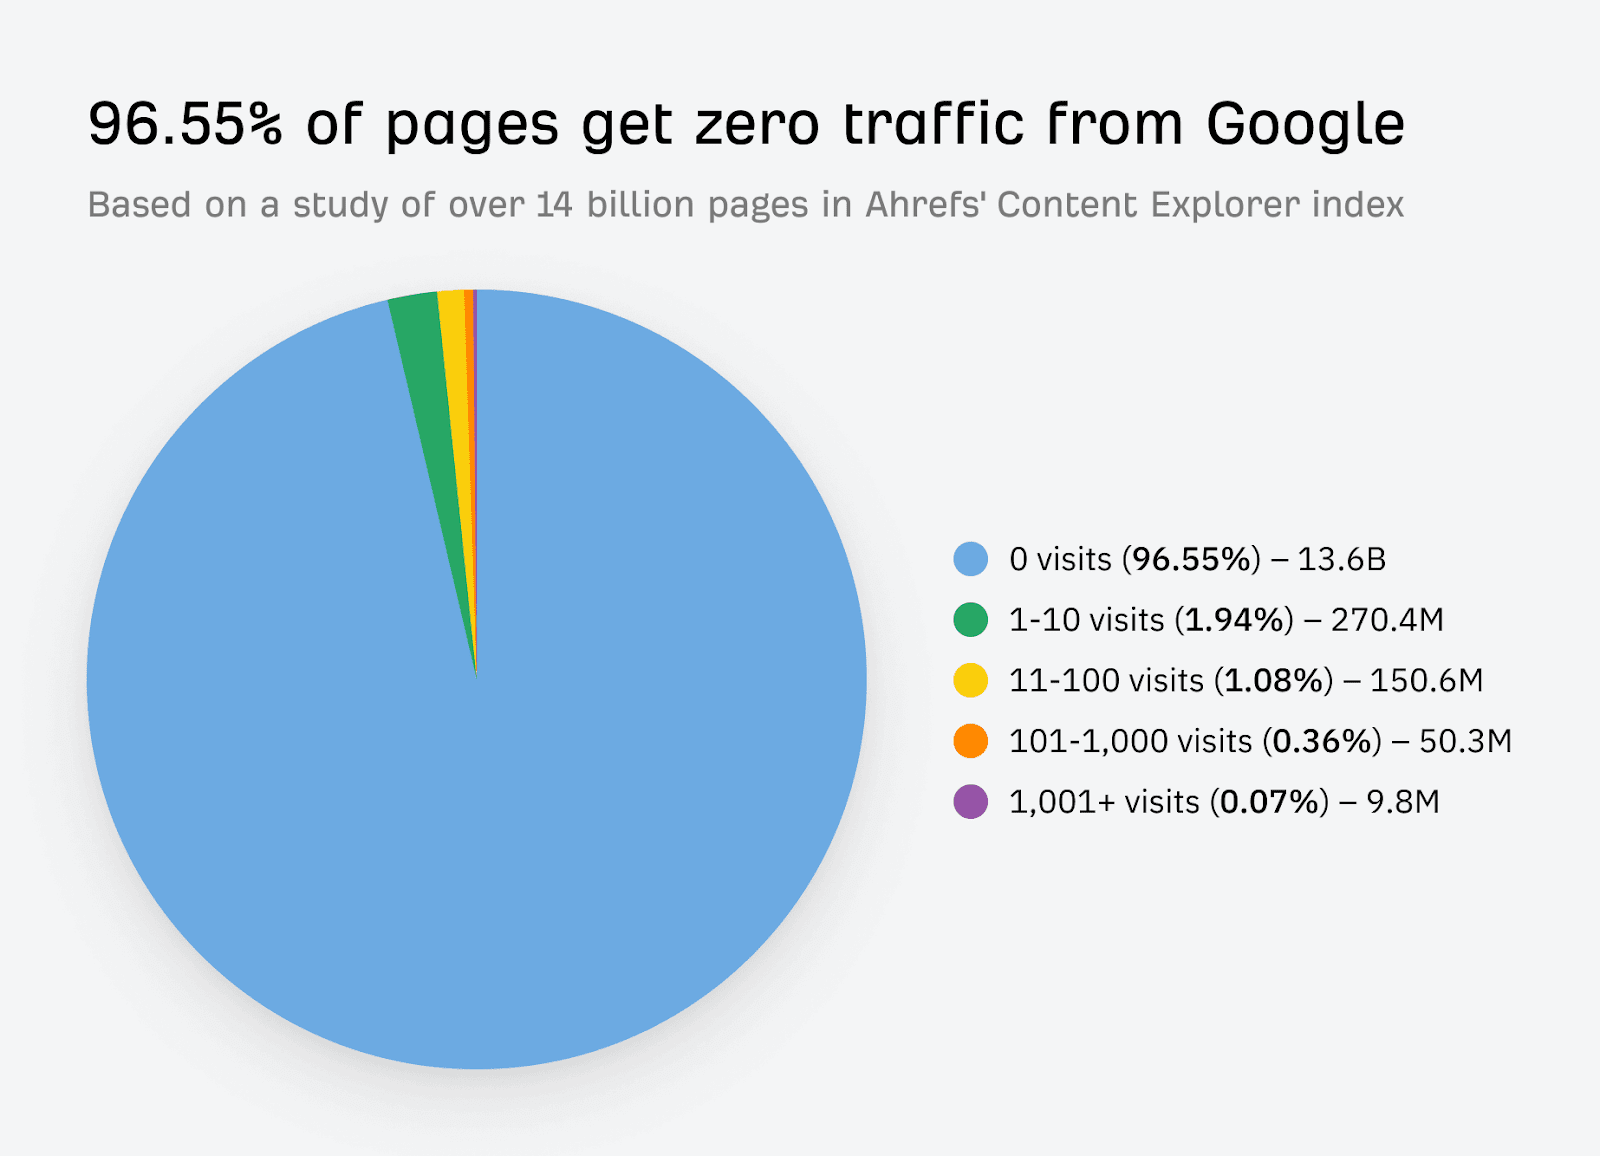 Ahrefs says that 96.55% of pages get zero traffic from Google. 